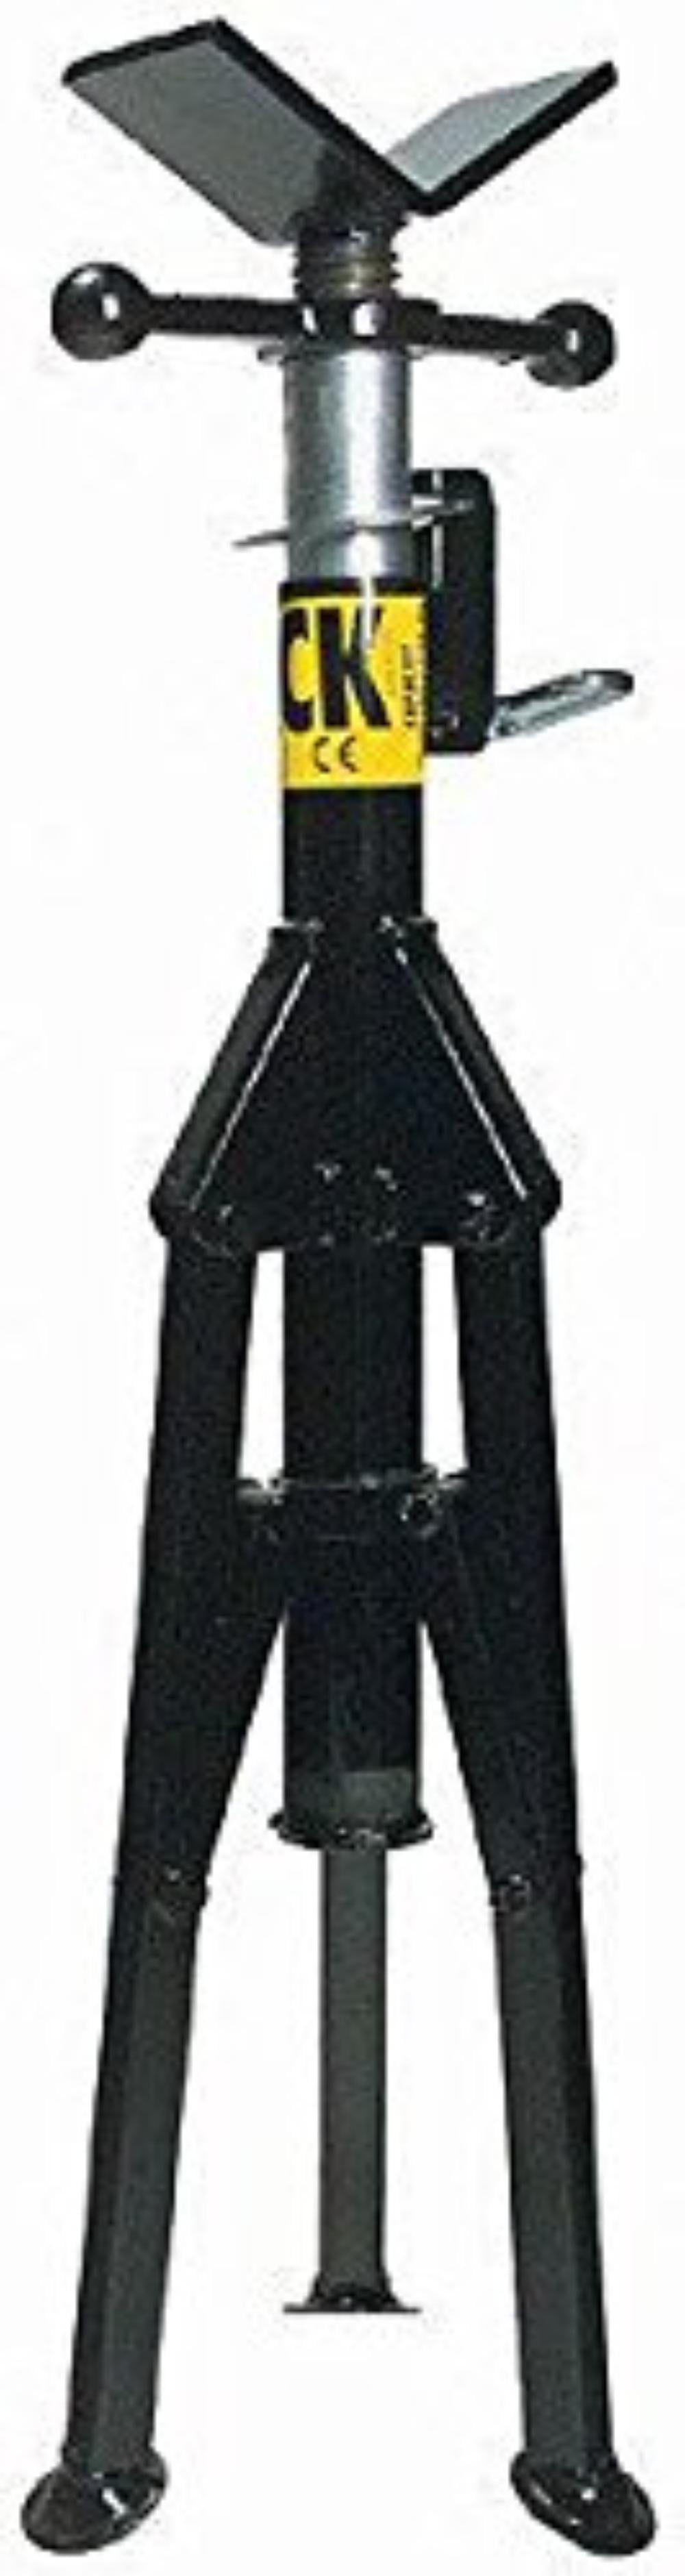 21 to 36 Adjustable Height Capacity Vee Head Sumner Manufacturing 781310 ST-981 Lo Fold-A- Jack 2,500 lb